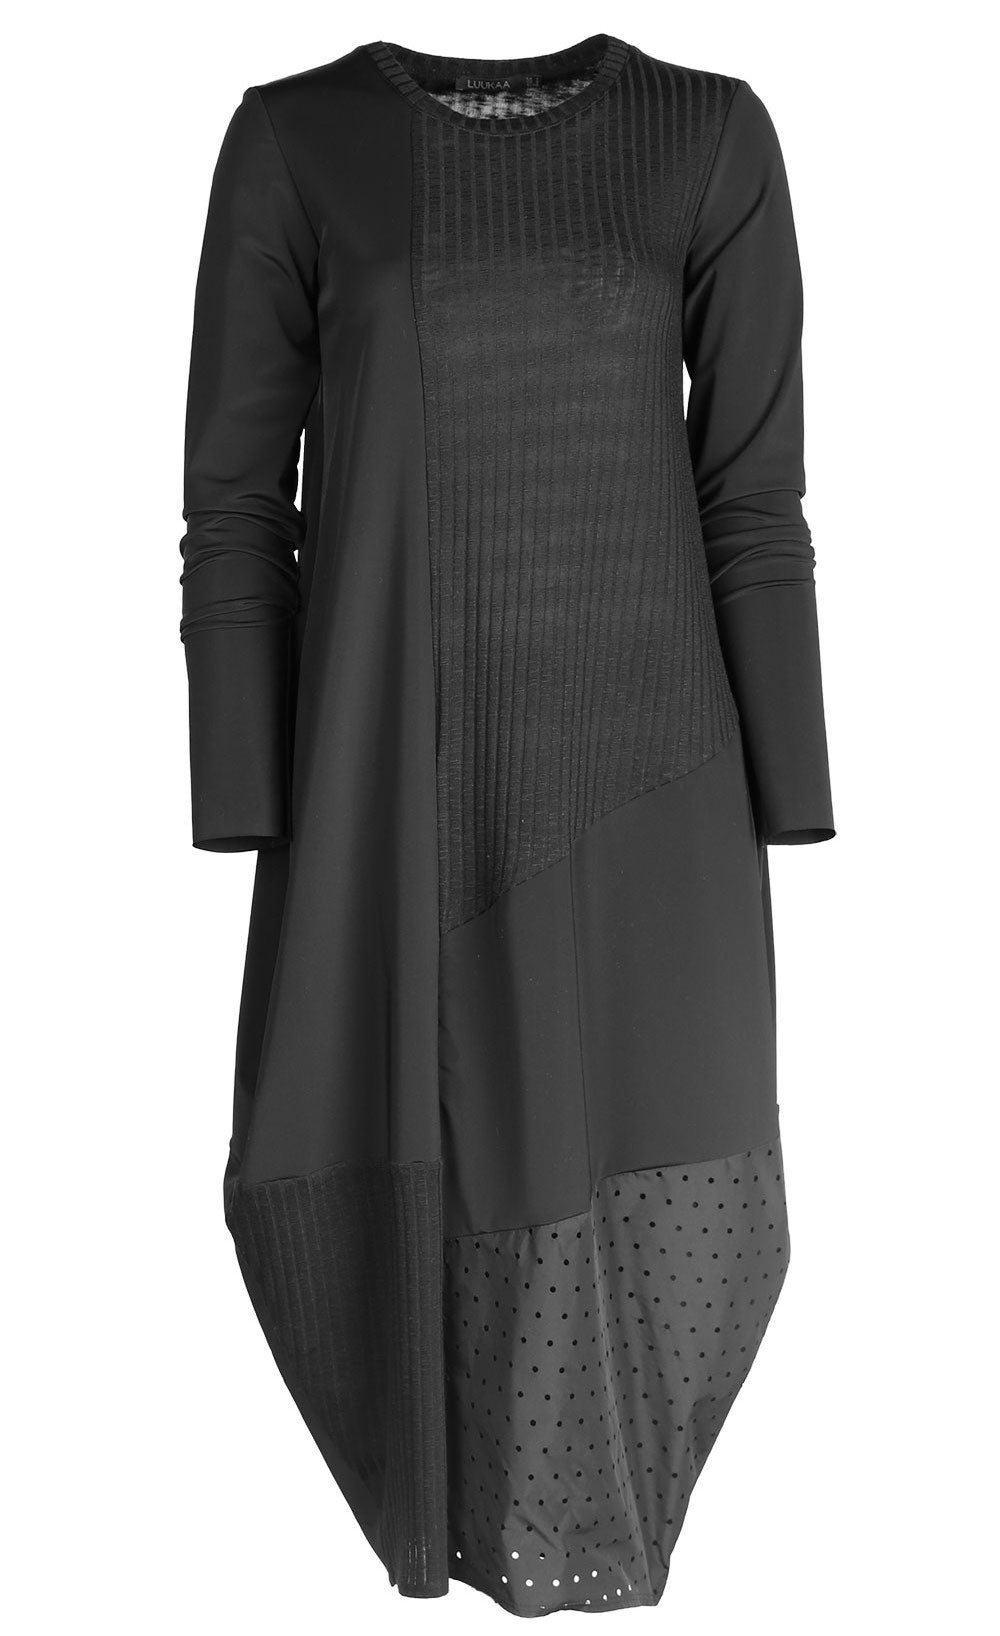 Front view of the black luukaa mixed media dress. This dress has long sleeves, a crew neck, and a mix of different black fabrics. The dress has extra space around the body with a tapered hem.